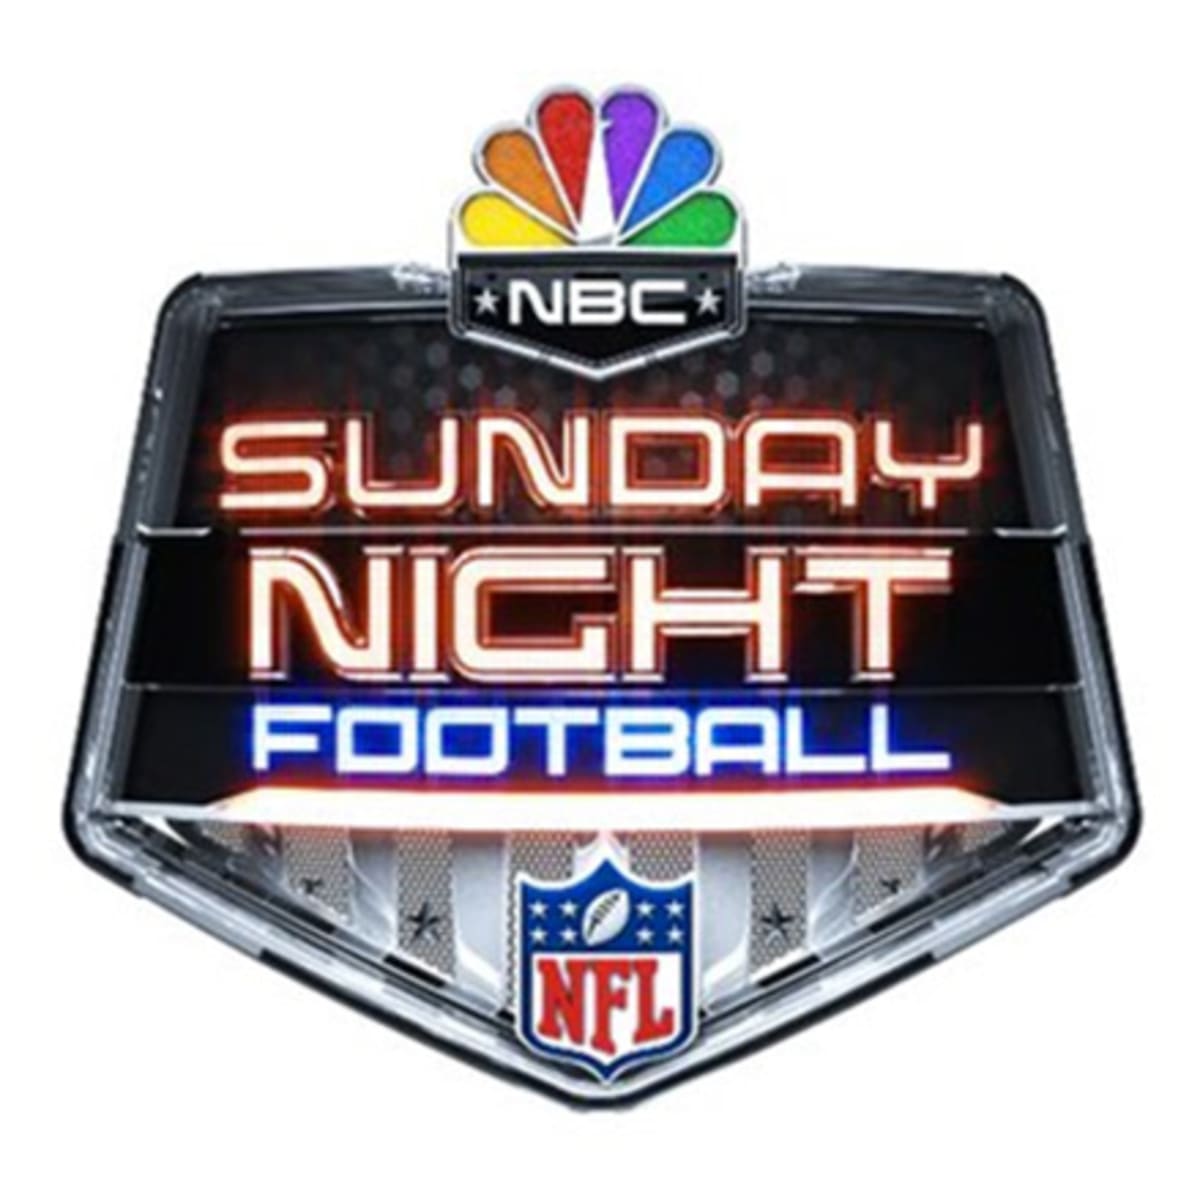 show me the sunday night football game